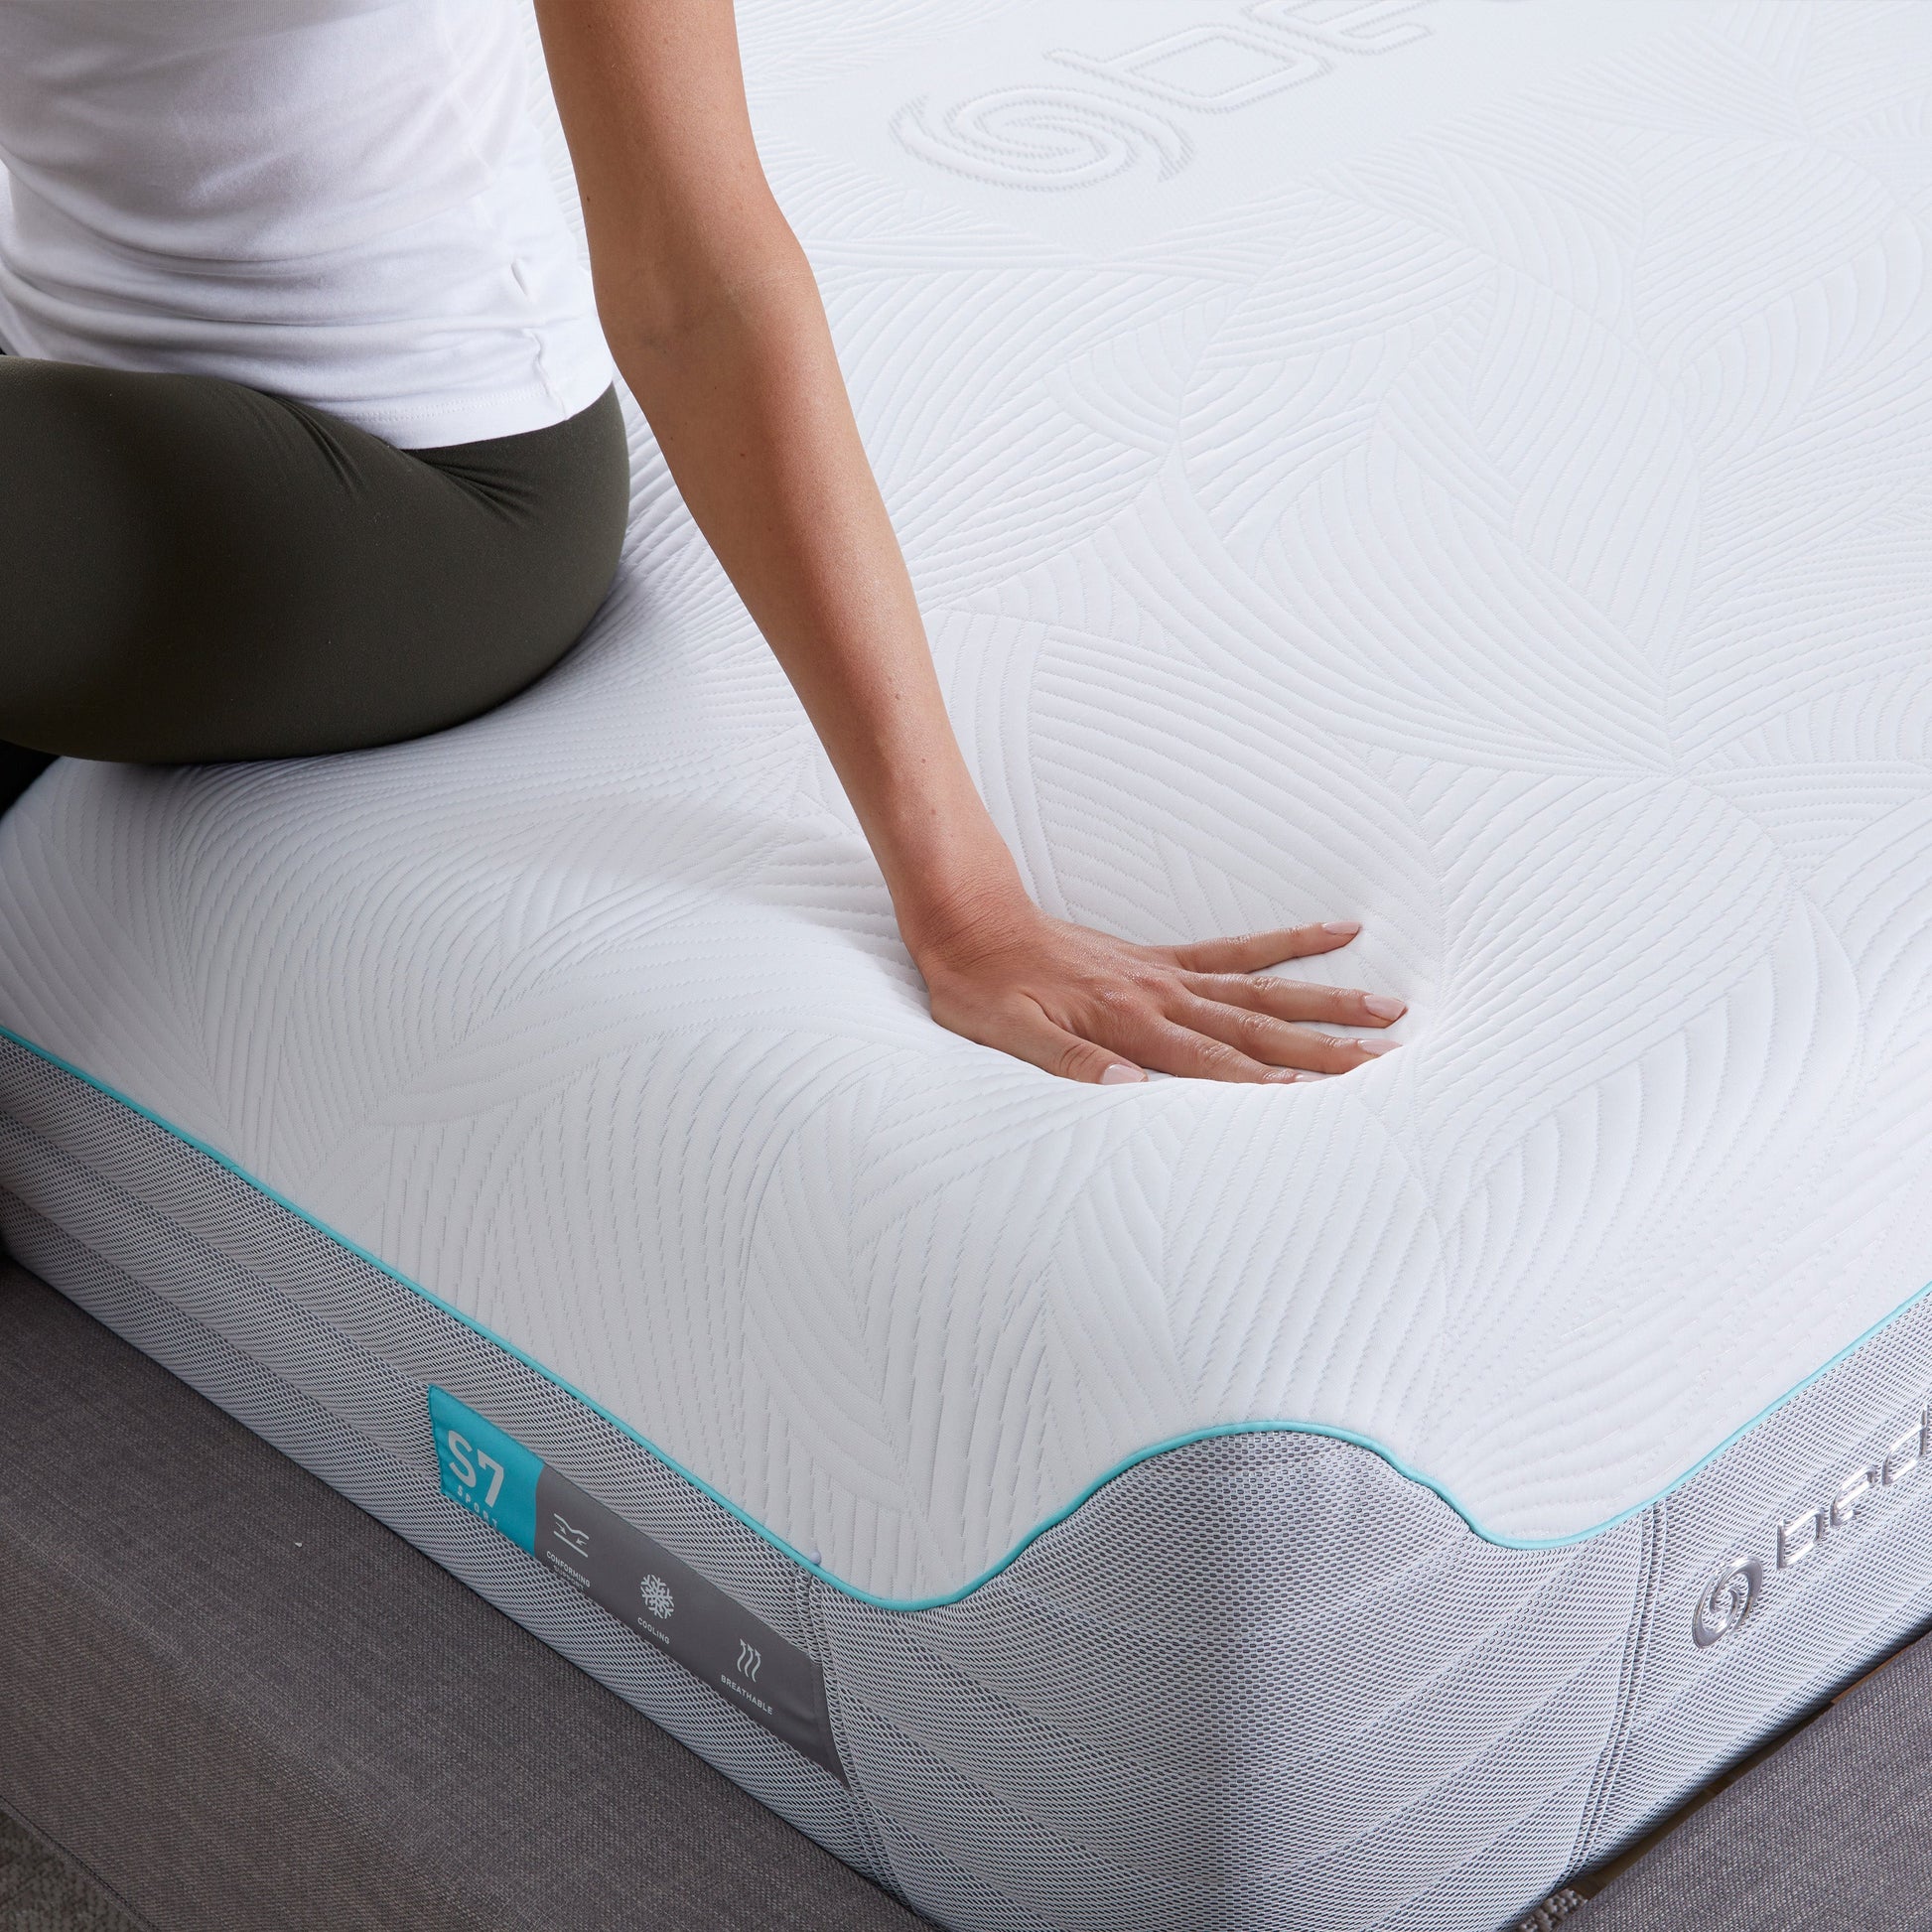 Hand Pressed On Bedgear S7 II Performance Mattress Cooling Cover